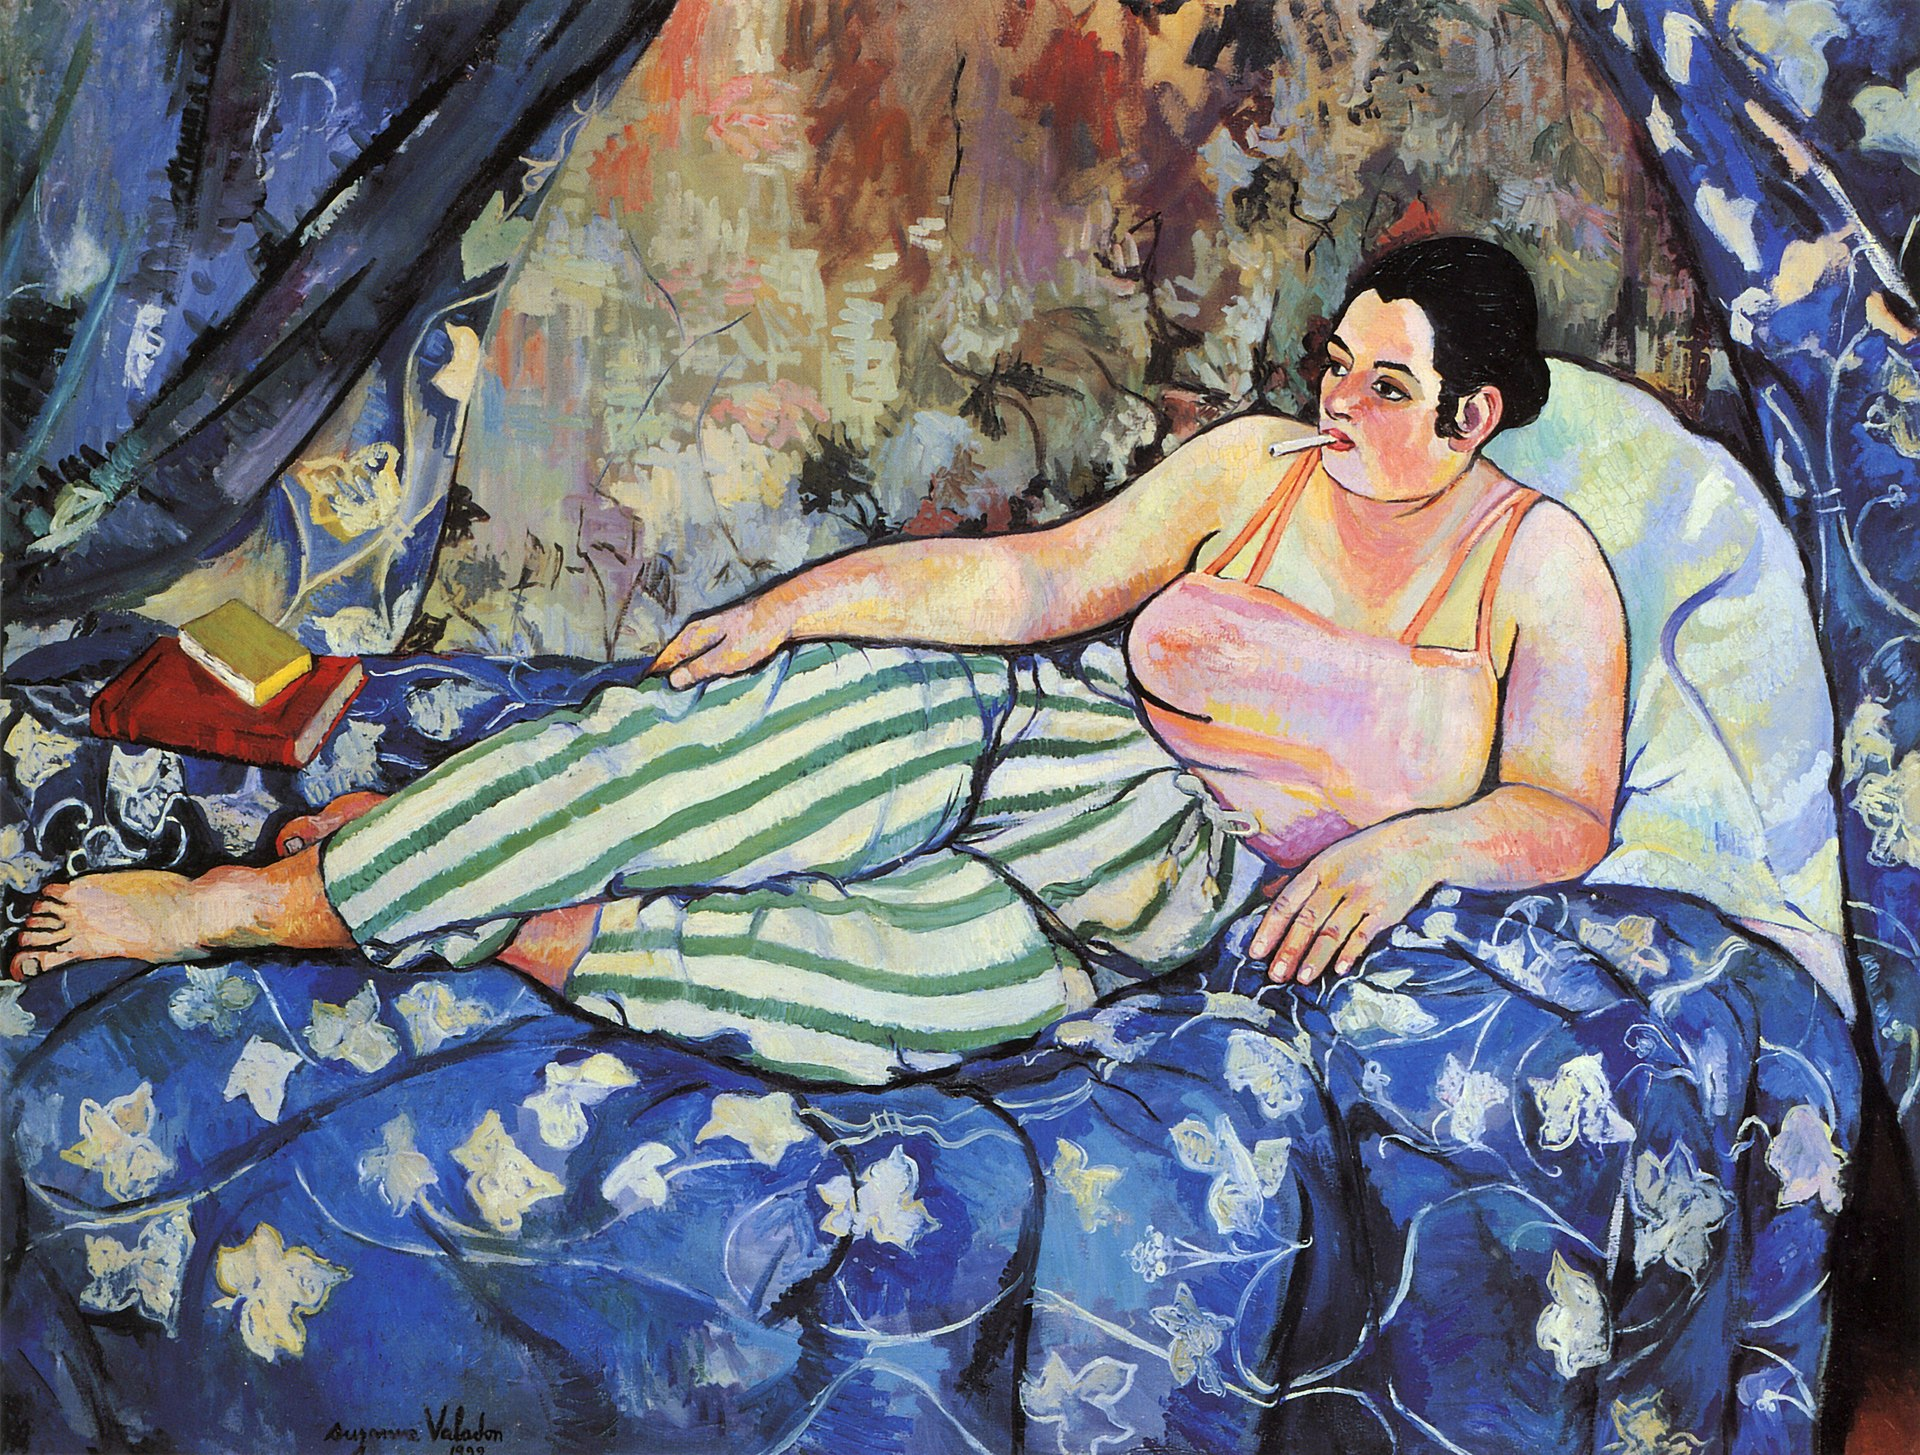 Self Portrait by Suzanne Valadon. Valadon learned to paint from those for whom she modeled.